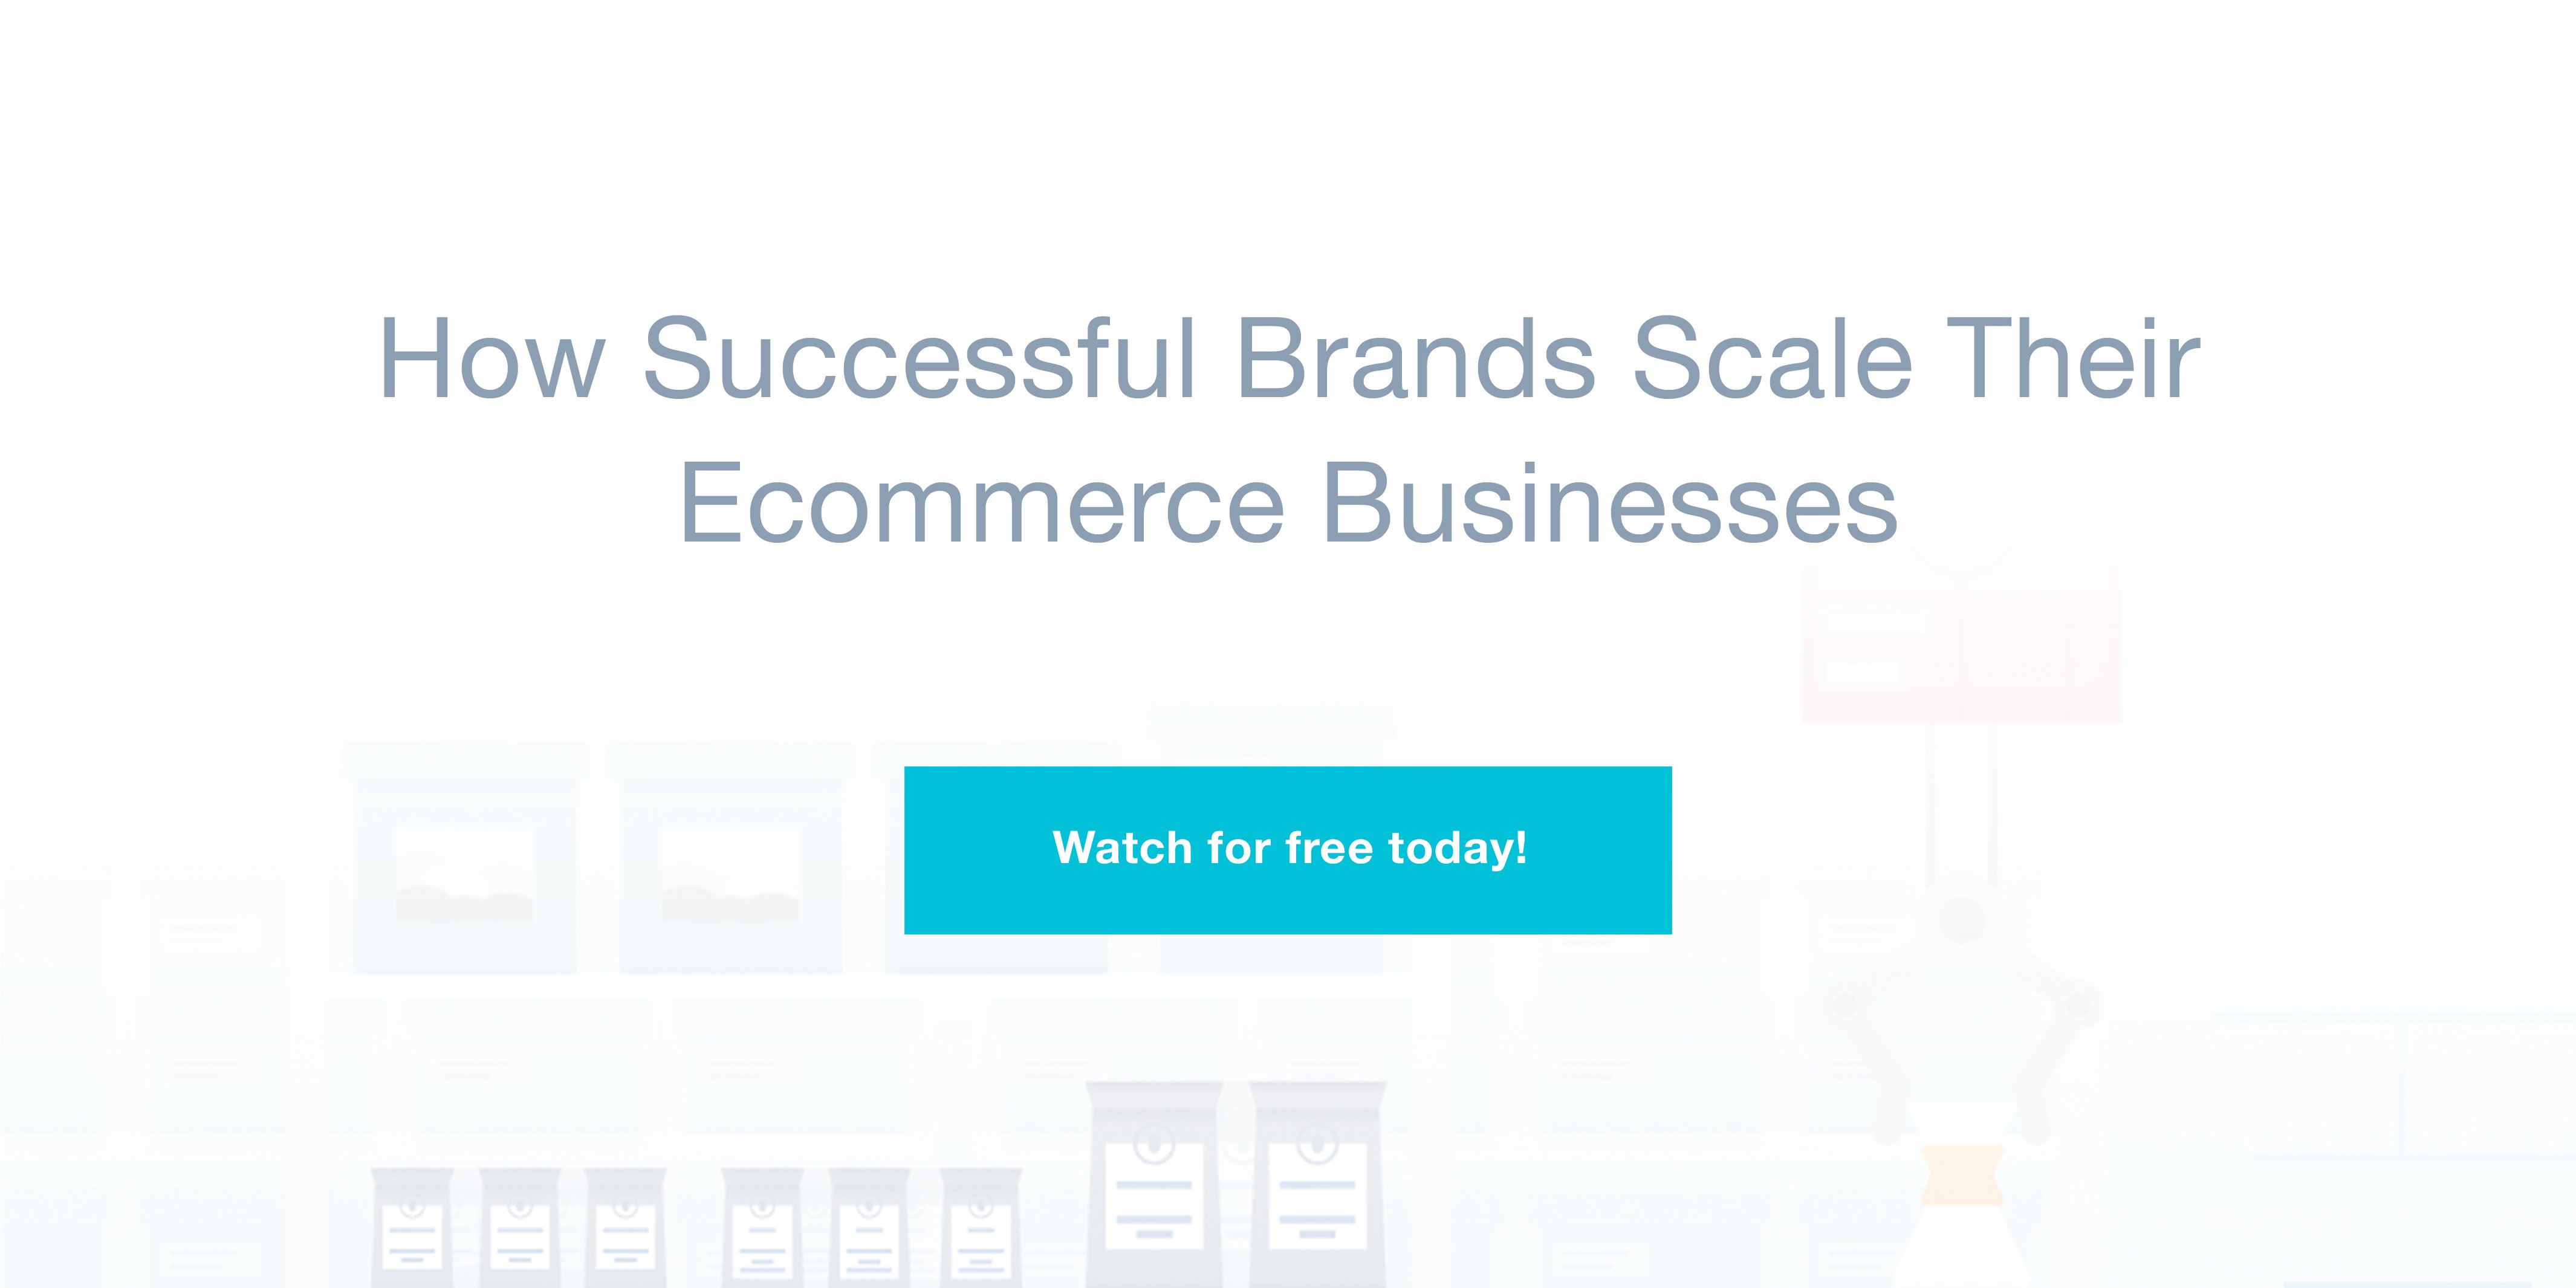 The link to watch the "How Successful Brands Scale Their Ecommerce Businesses"